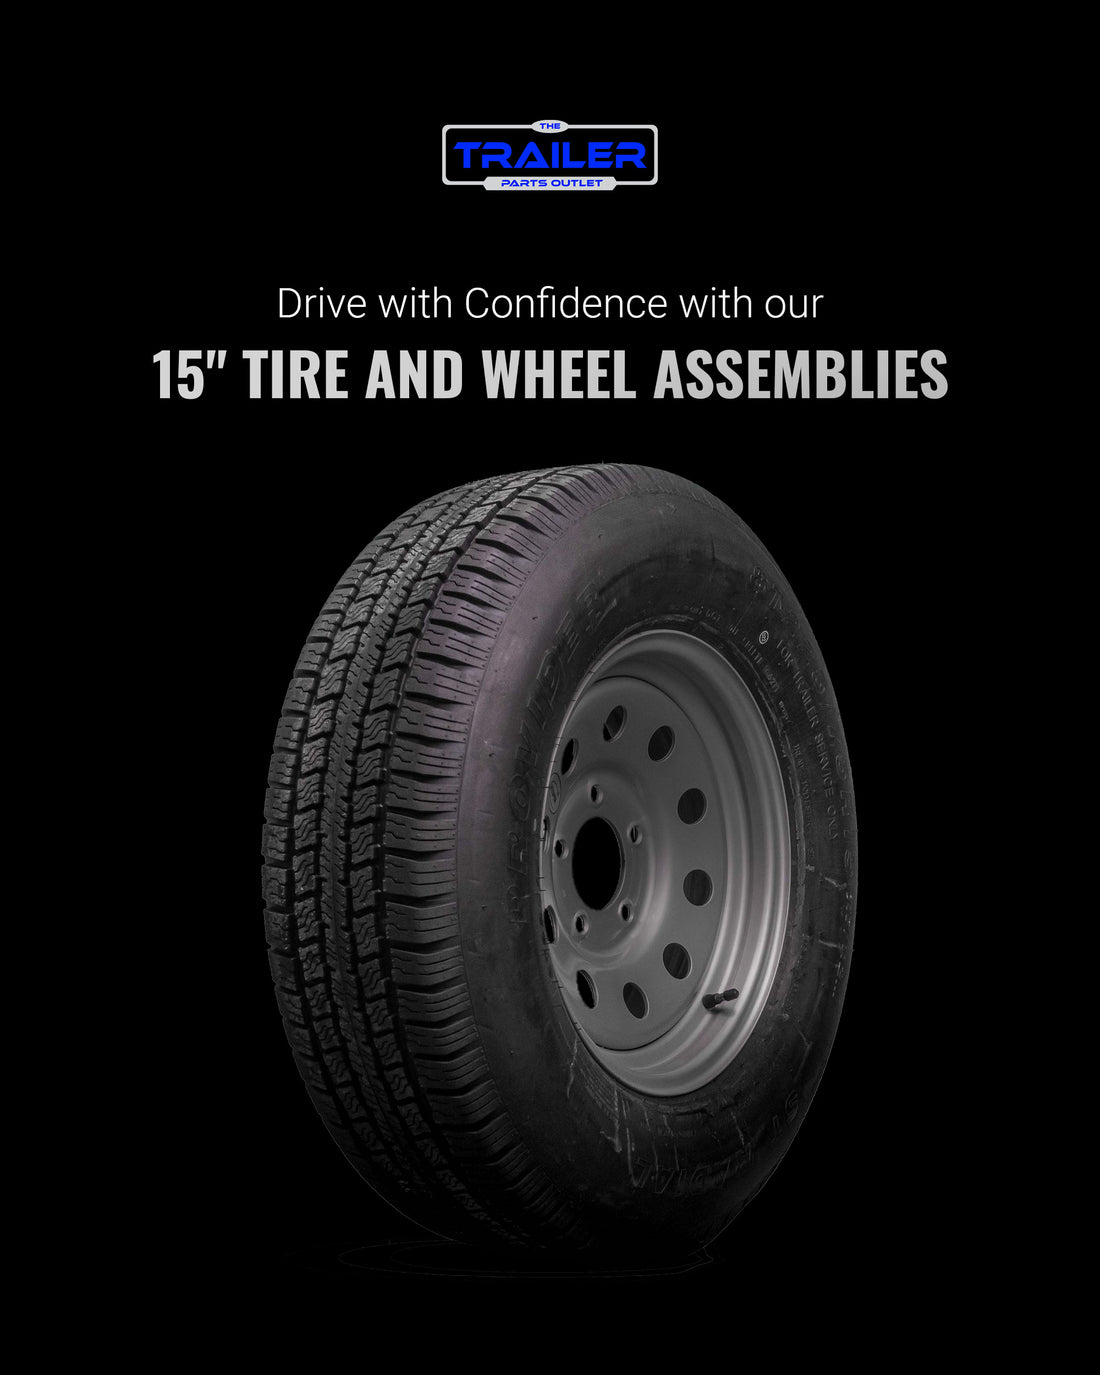 The Trailer Parts Outlet |  15" Tire and Wheel Assemblies